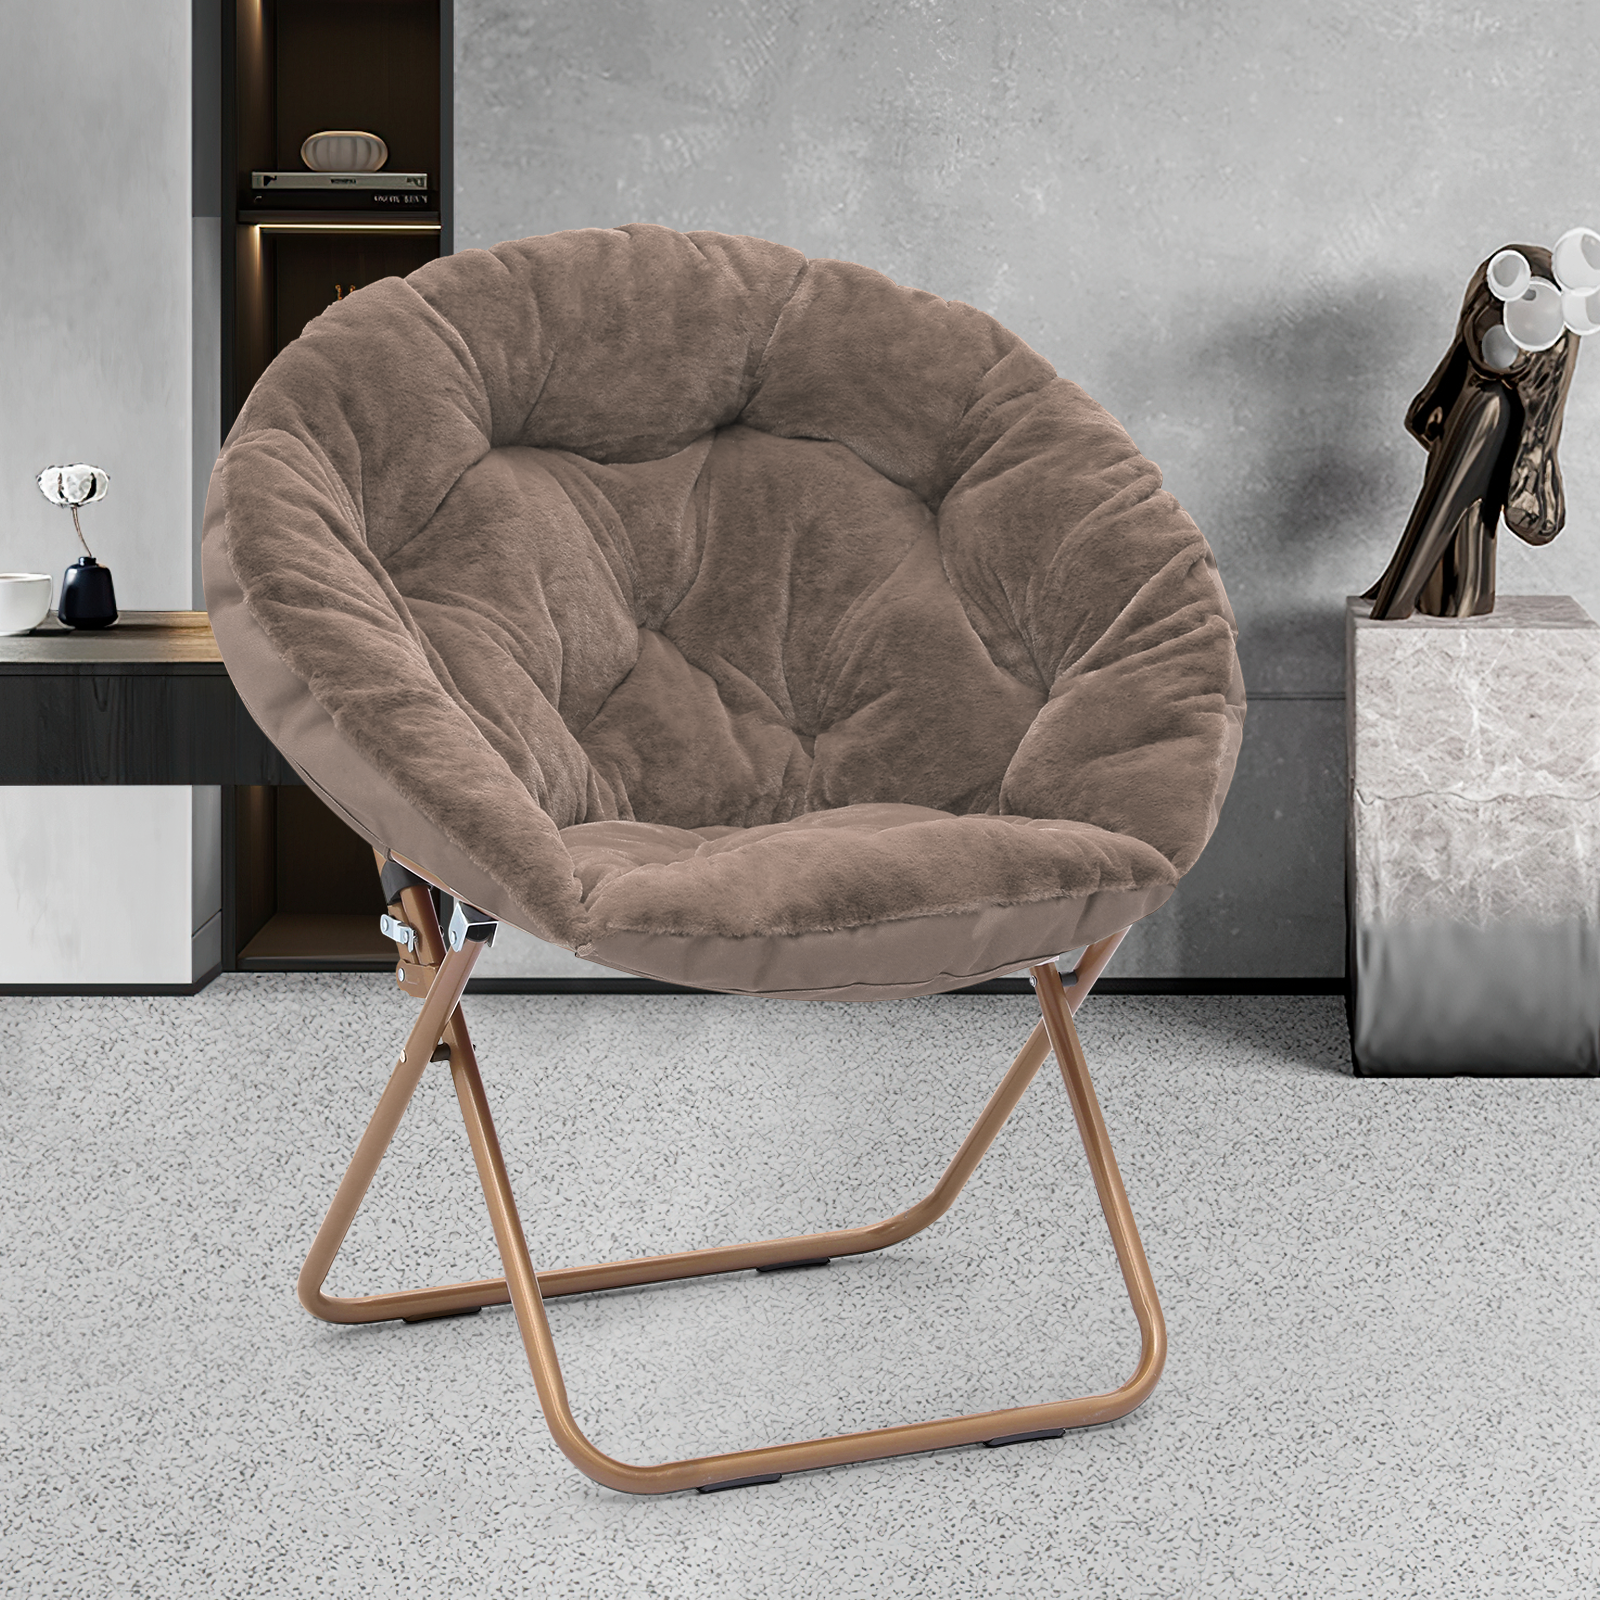 Magshion Comfy Saucer Chair, Foldable Faux Fur Lounge Chair for Bedroom Living Room, Cozy Moon Chair with Metal Frame for Adults, X-Large, Beige - image 3 of 10